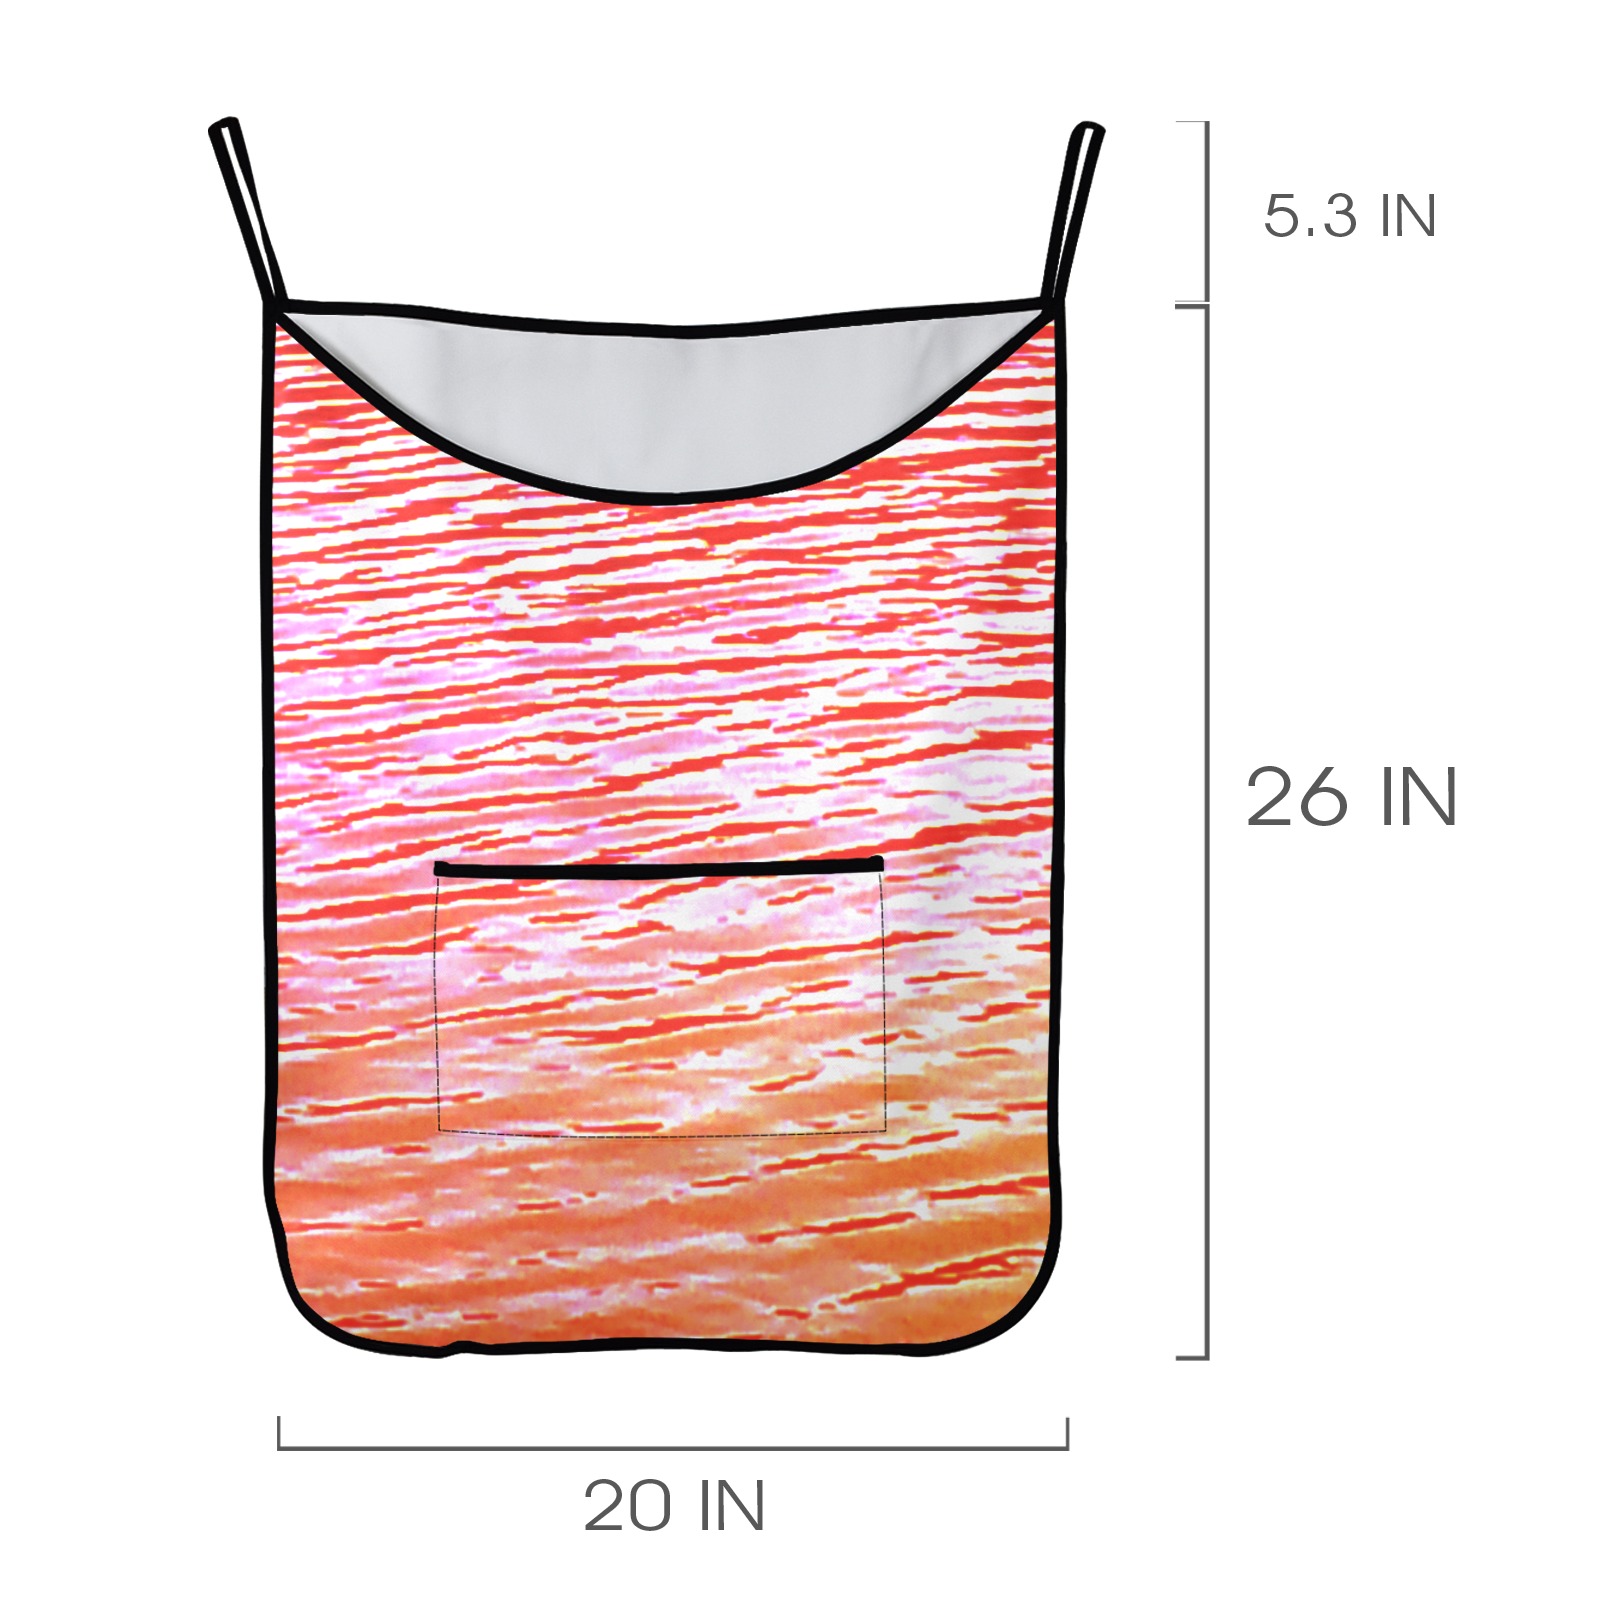 Orange and red water Hanging Laundry Bag